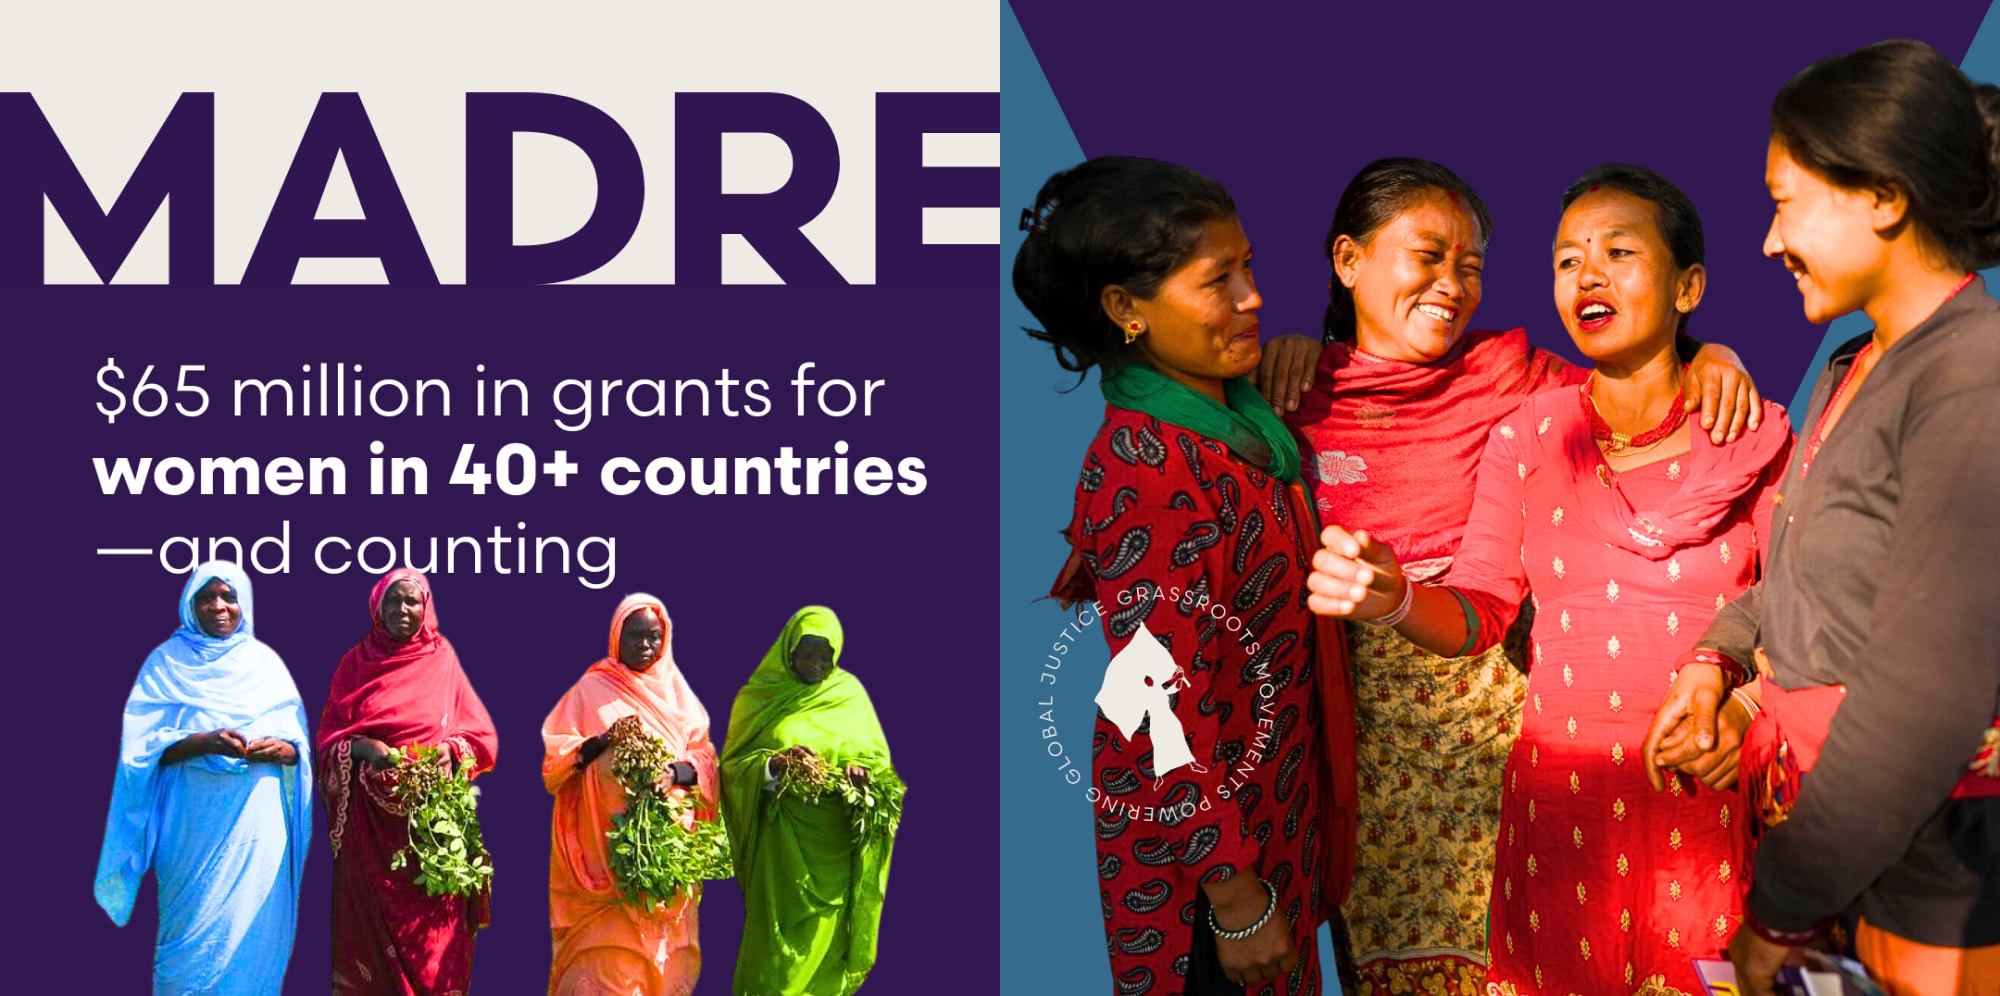 2 MADRE ads sit side-by-side: one features the MADRE logo very large with a group photo cut-out of African women in colorful hijabs carrying baskets of harvested crops overlapping a headline that reads, “$65 million in grants for women in 40+ countries—and counting;” the second ad features a group of Asian women in colorful and traditional garb laughing and conversing on a big and bold purple triangle graphic with the MADRE badge overlapping.